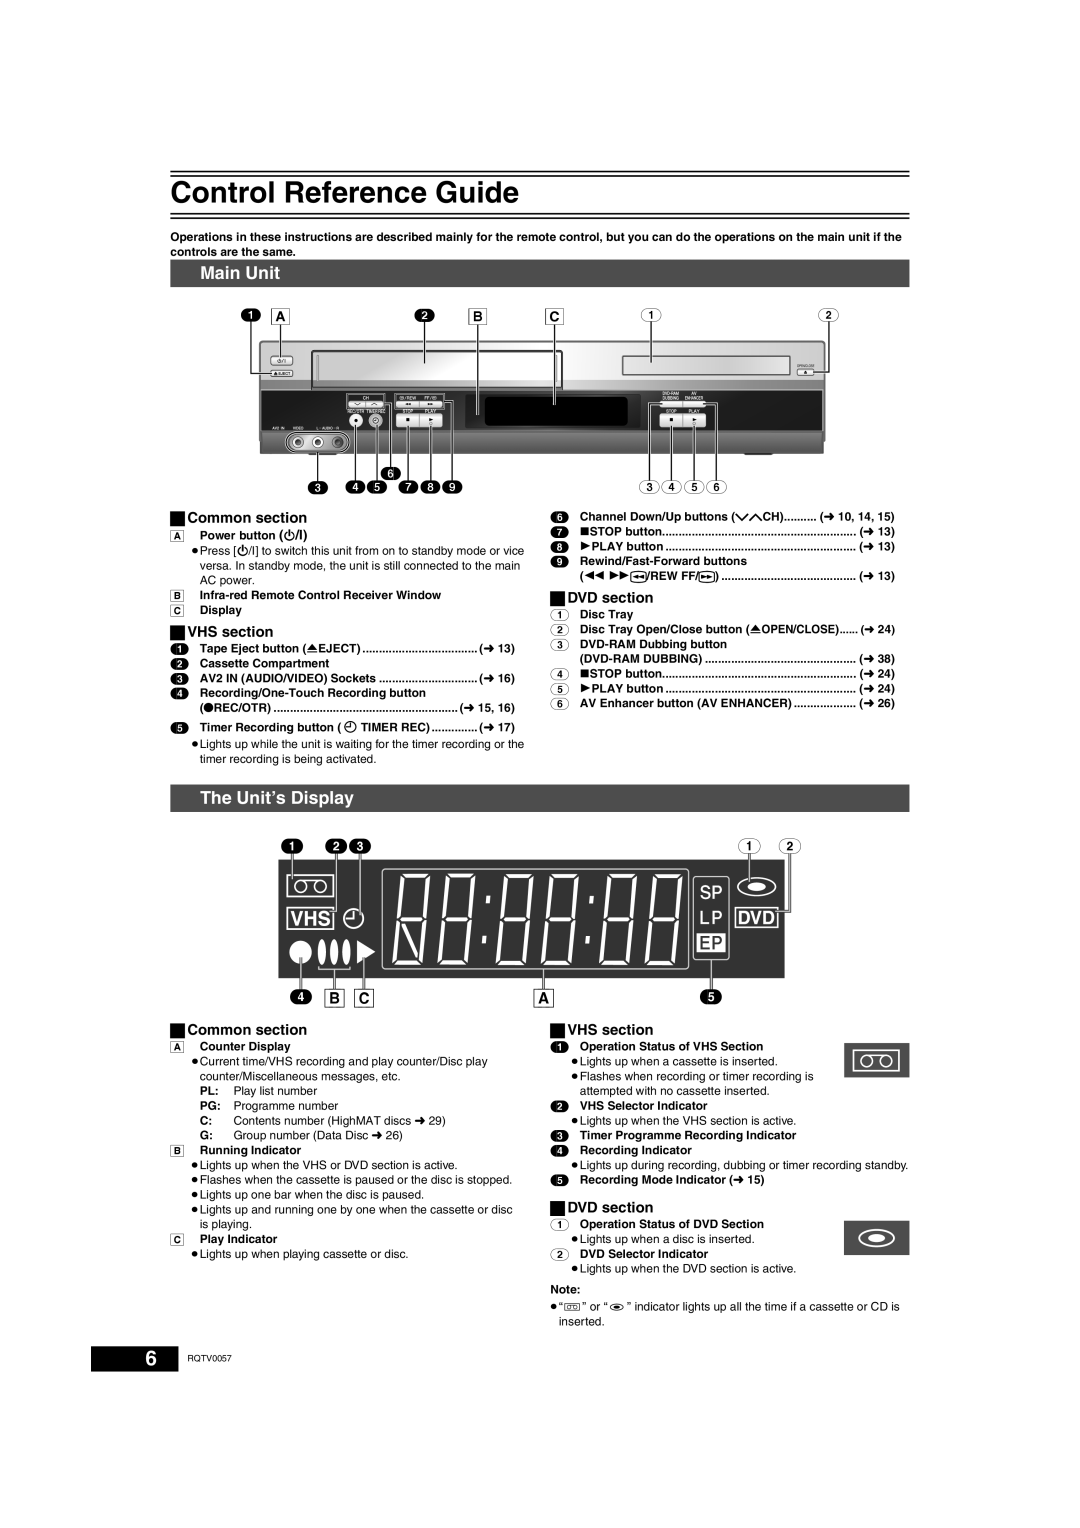 Panasonic NV-VP33 Series Control Reference Guide, Main Unit, The Unit’s Display, ª Common section, ª VHS section, 4 B C 